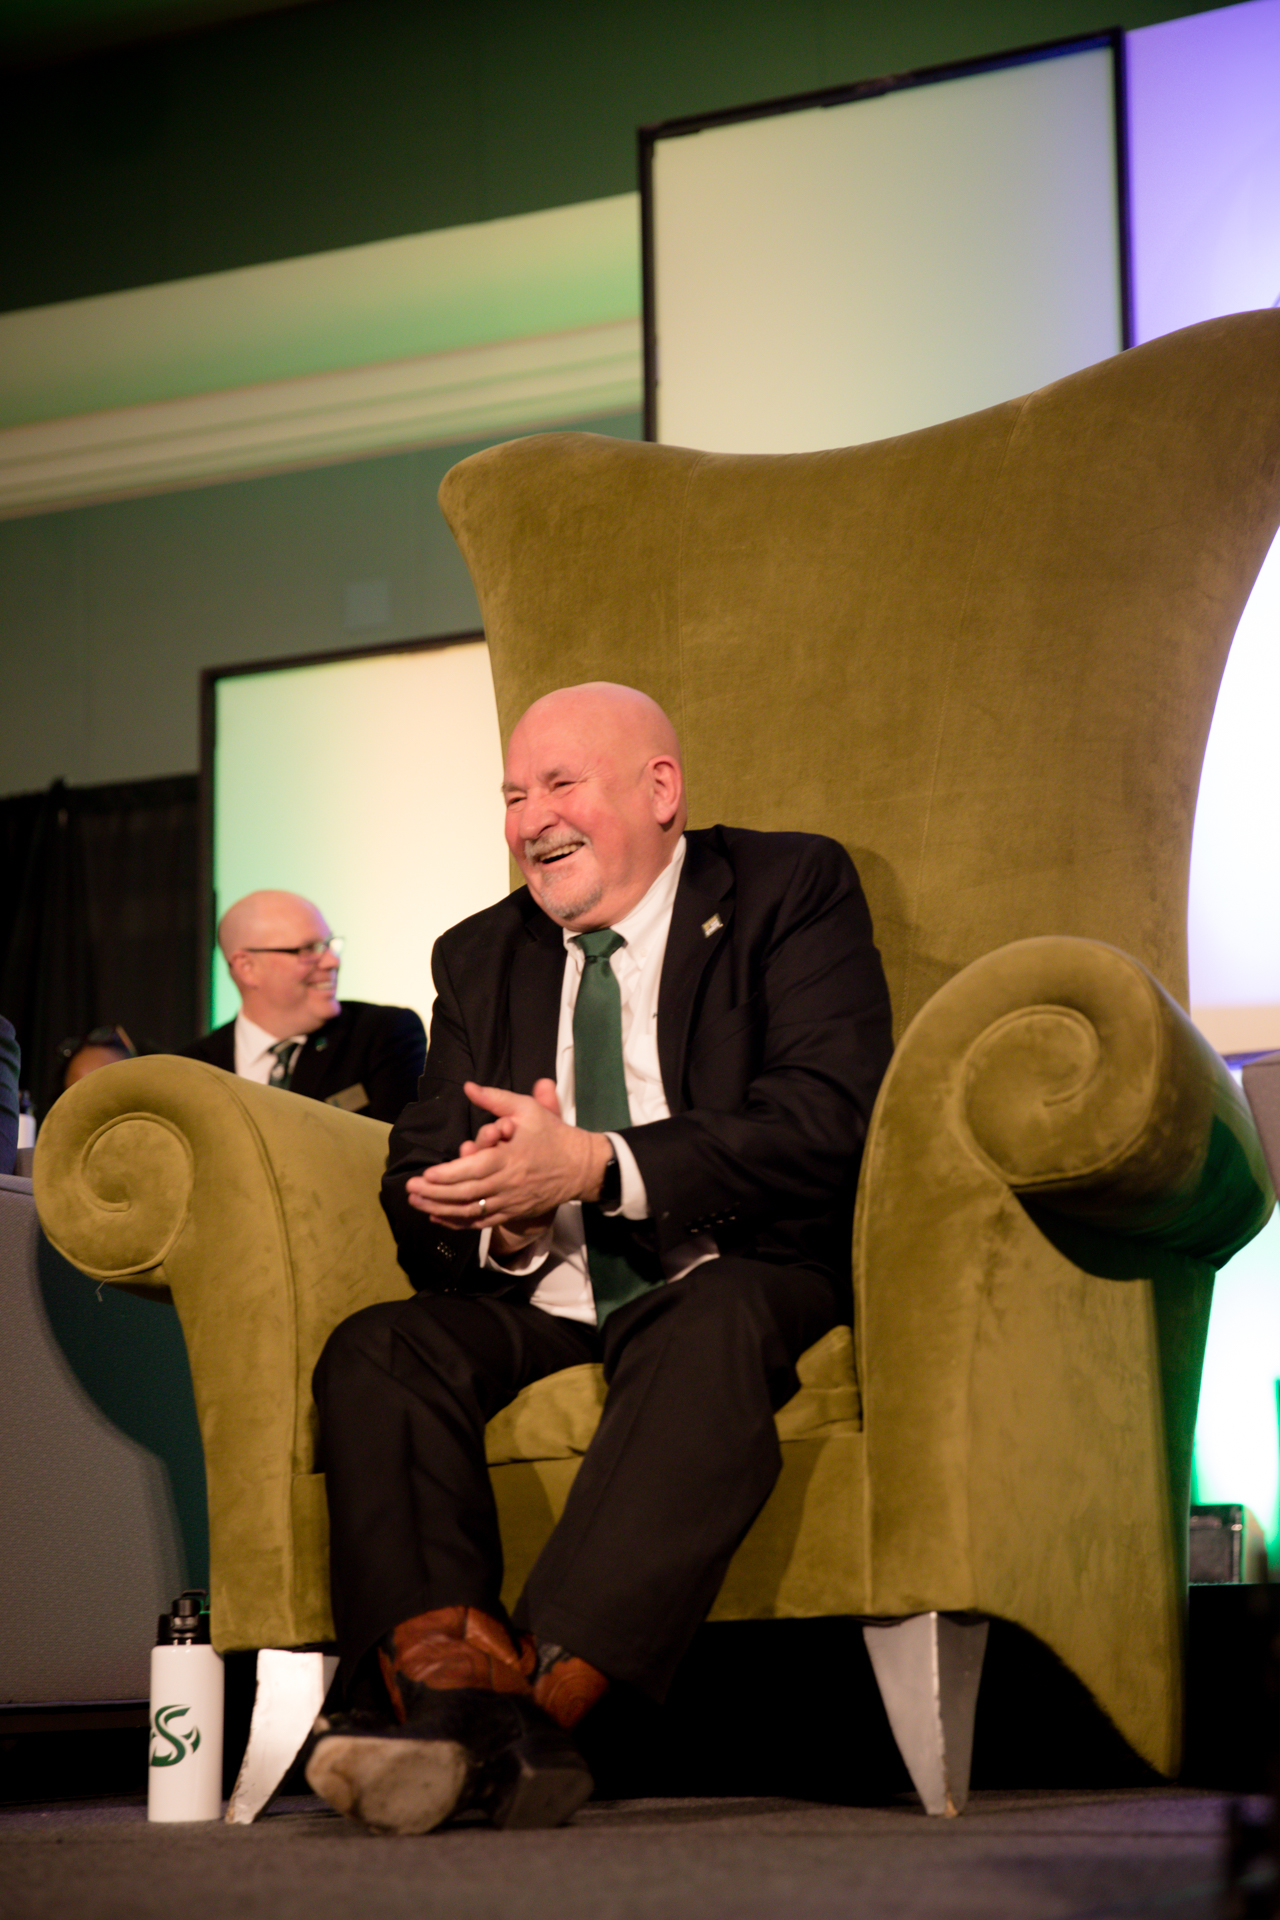 Sitting in an oversized green chair, President Nelsen laughs and claps during a joke at his roast.